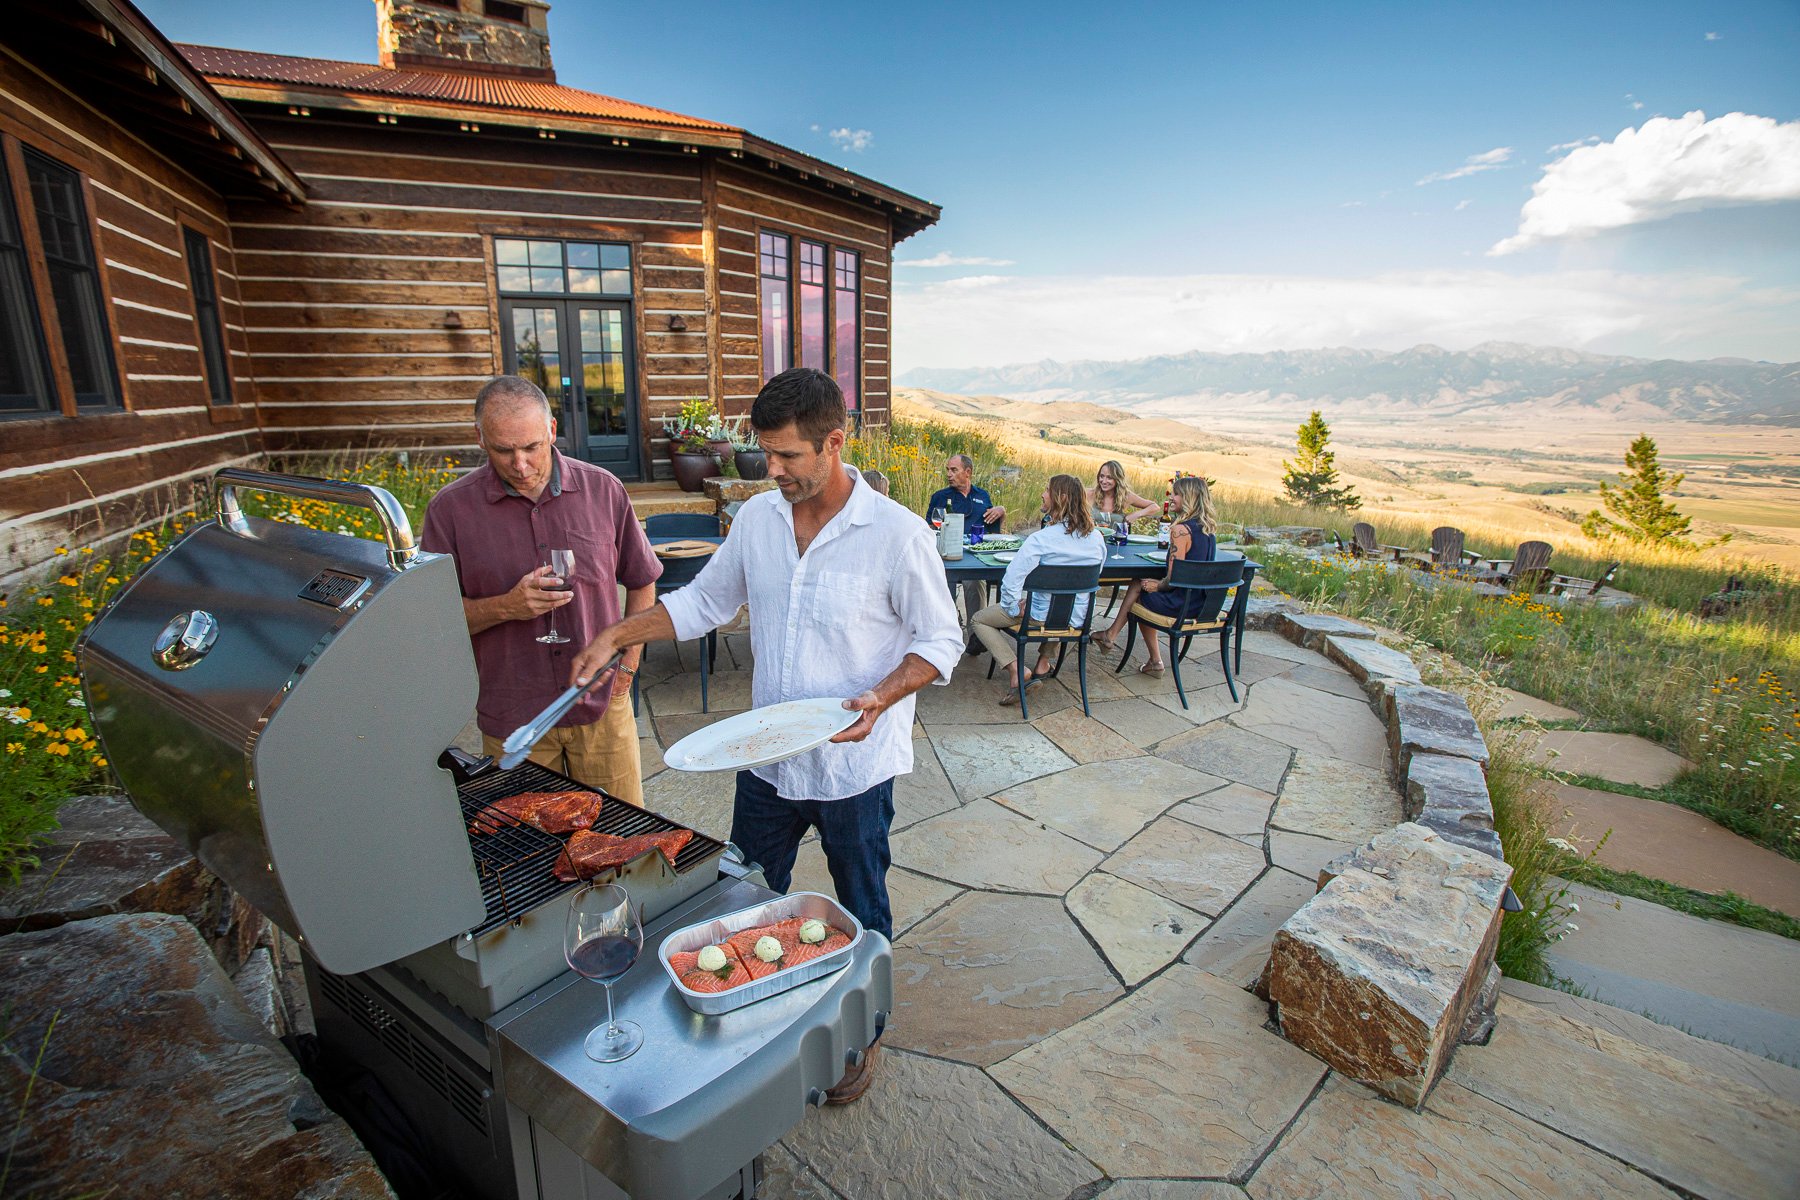 Outdoor kitchen grilling